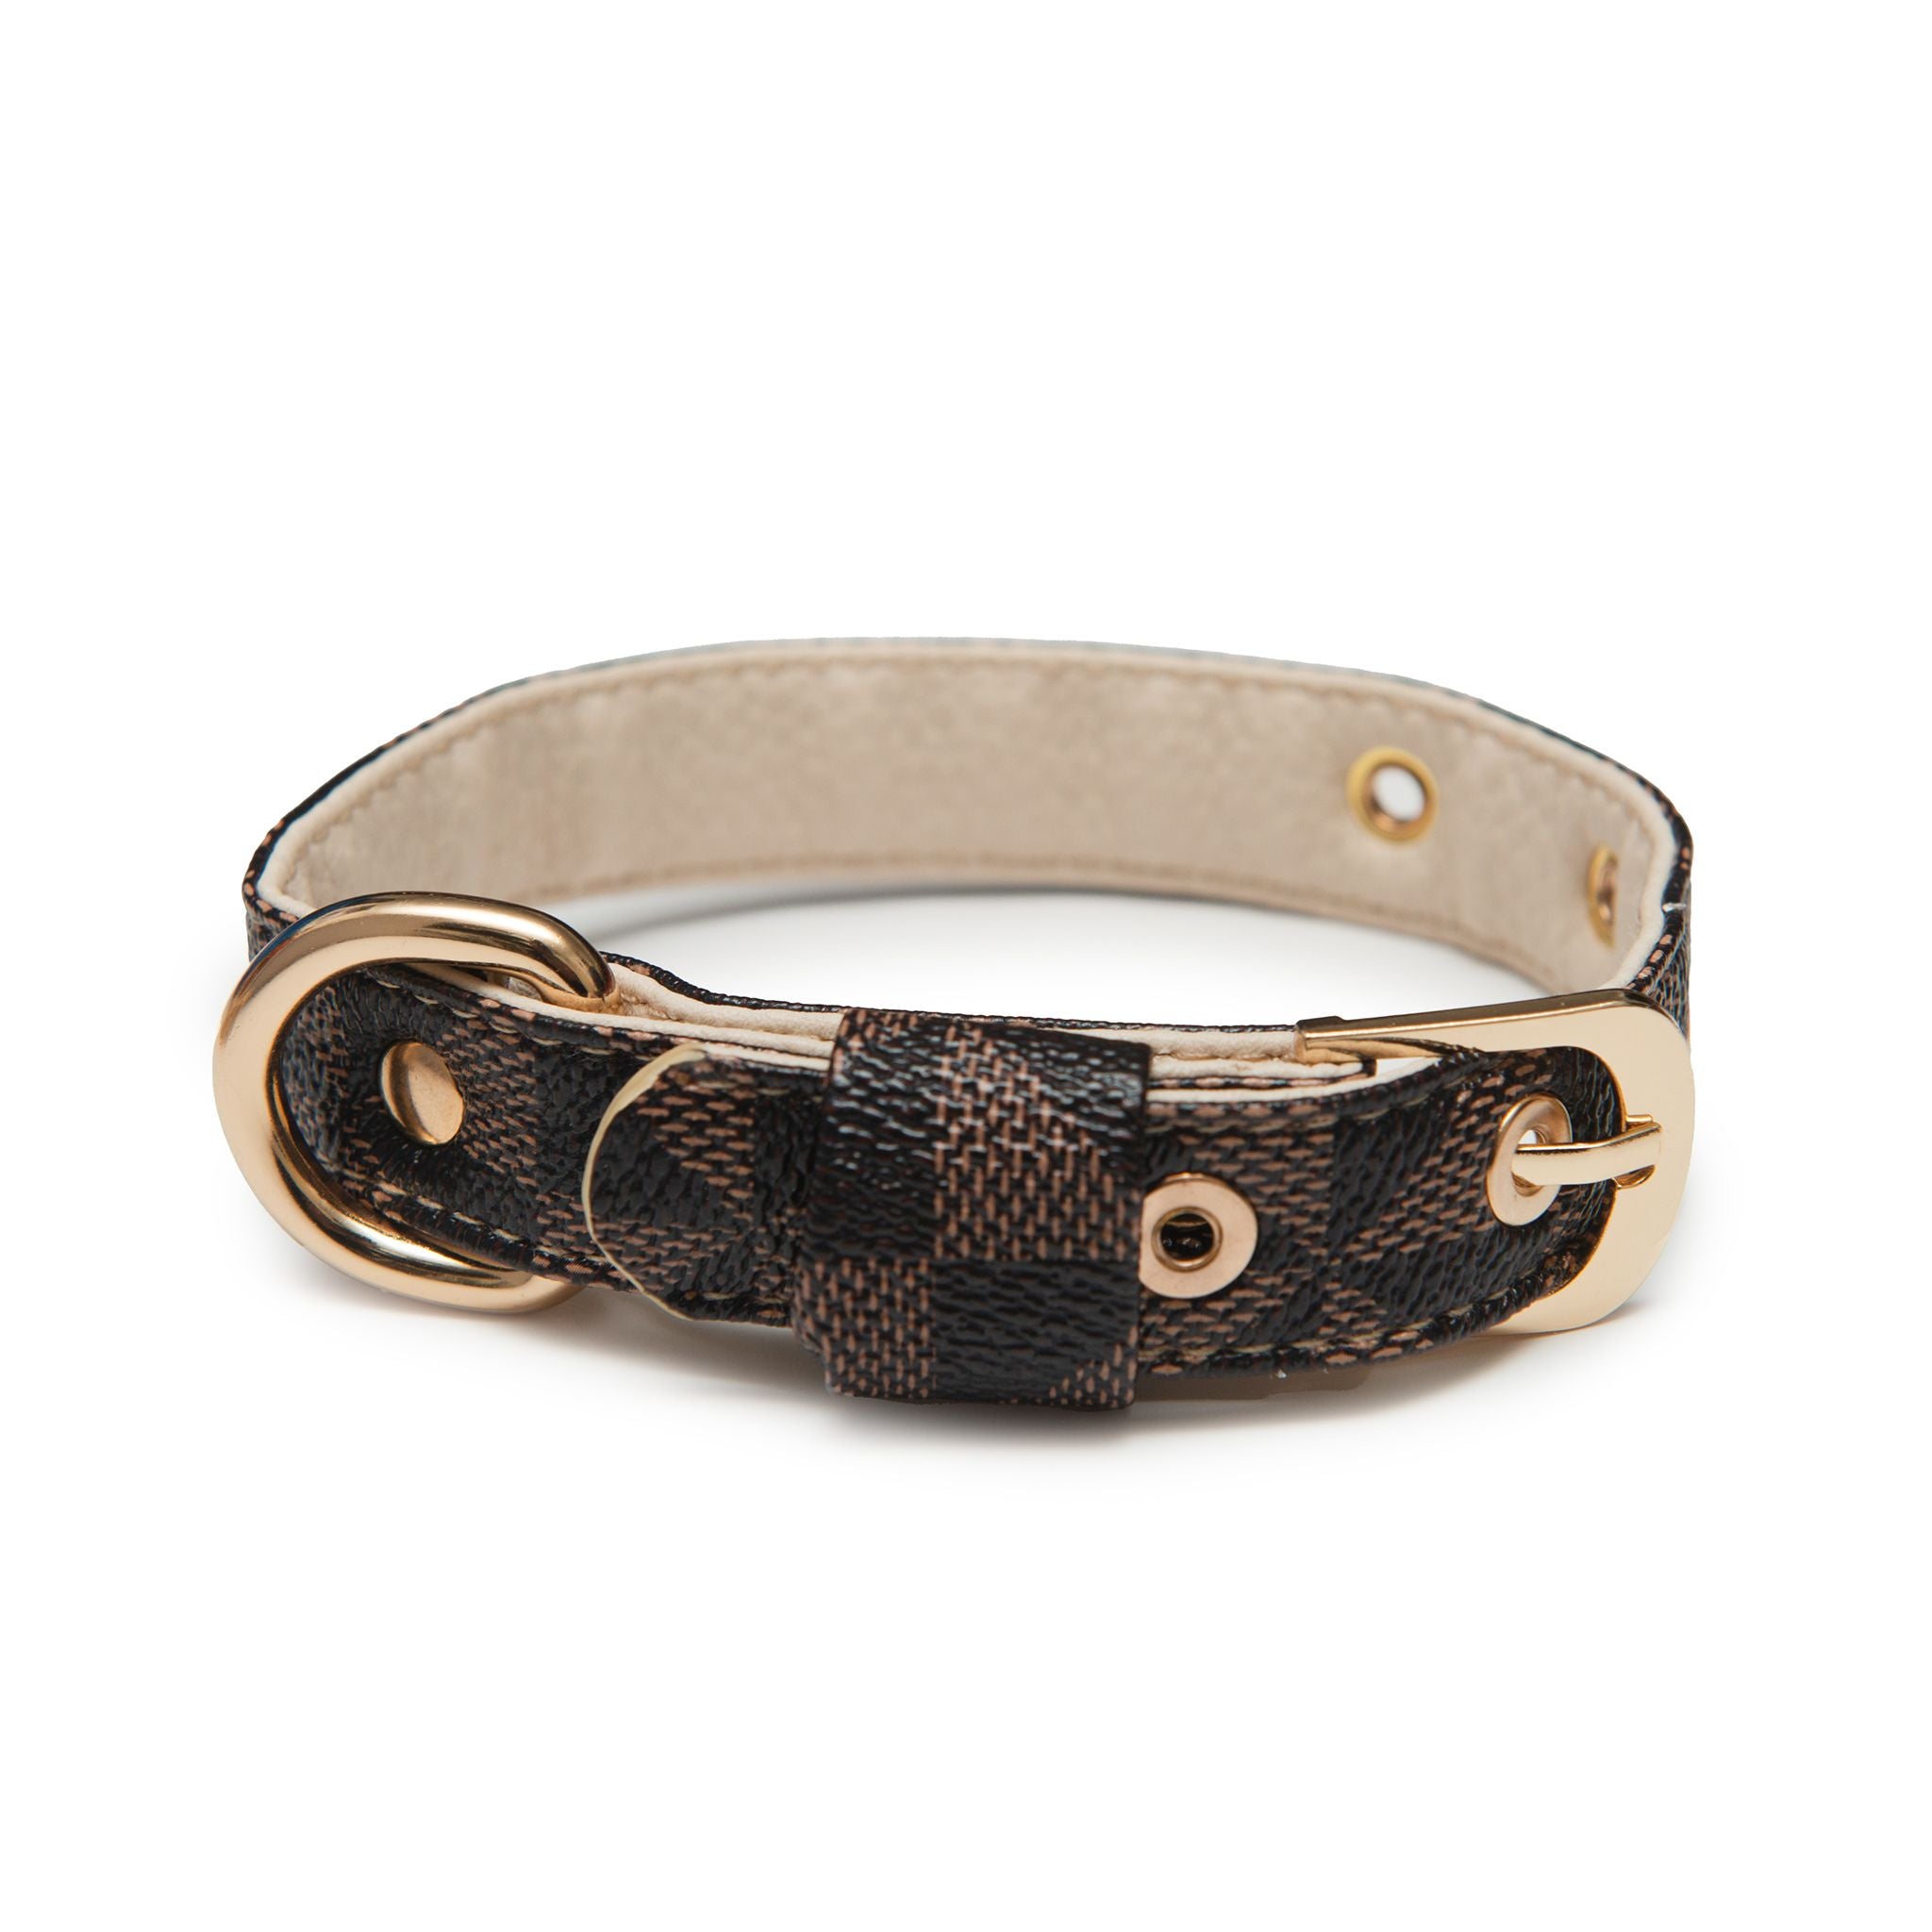 Louis Vuitton Monogram Pet leash and collar in Brown Canvas